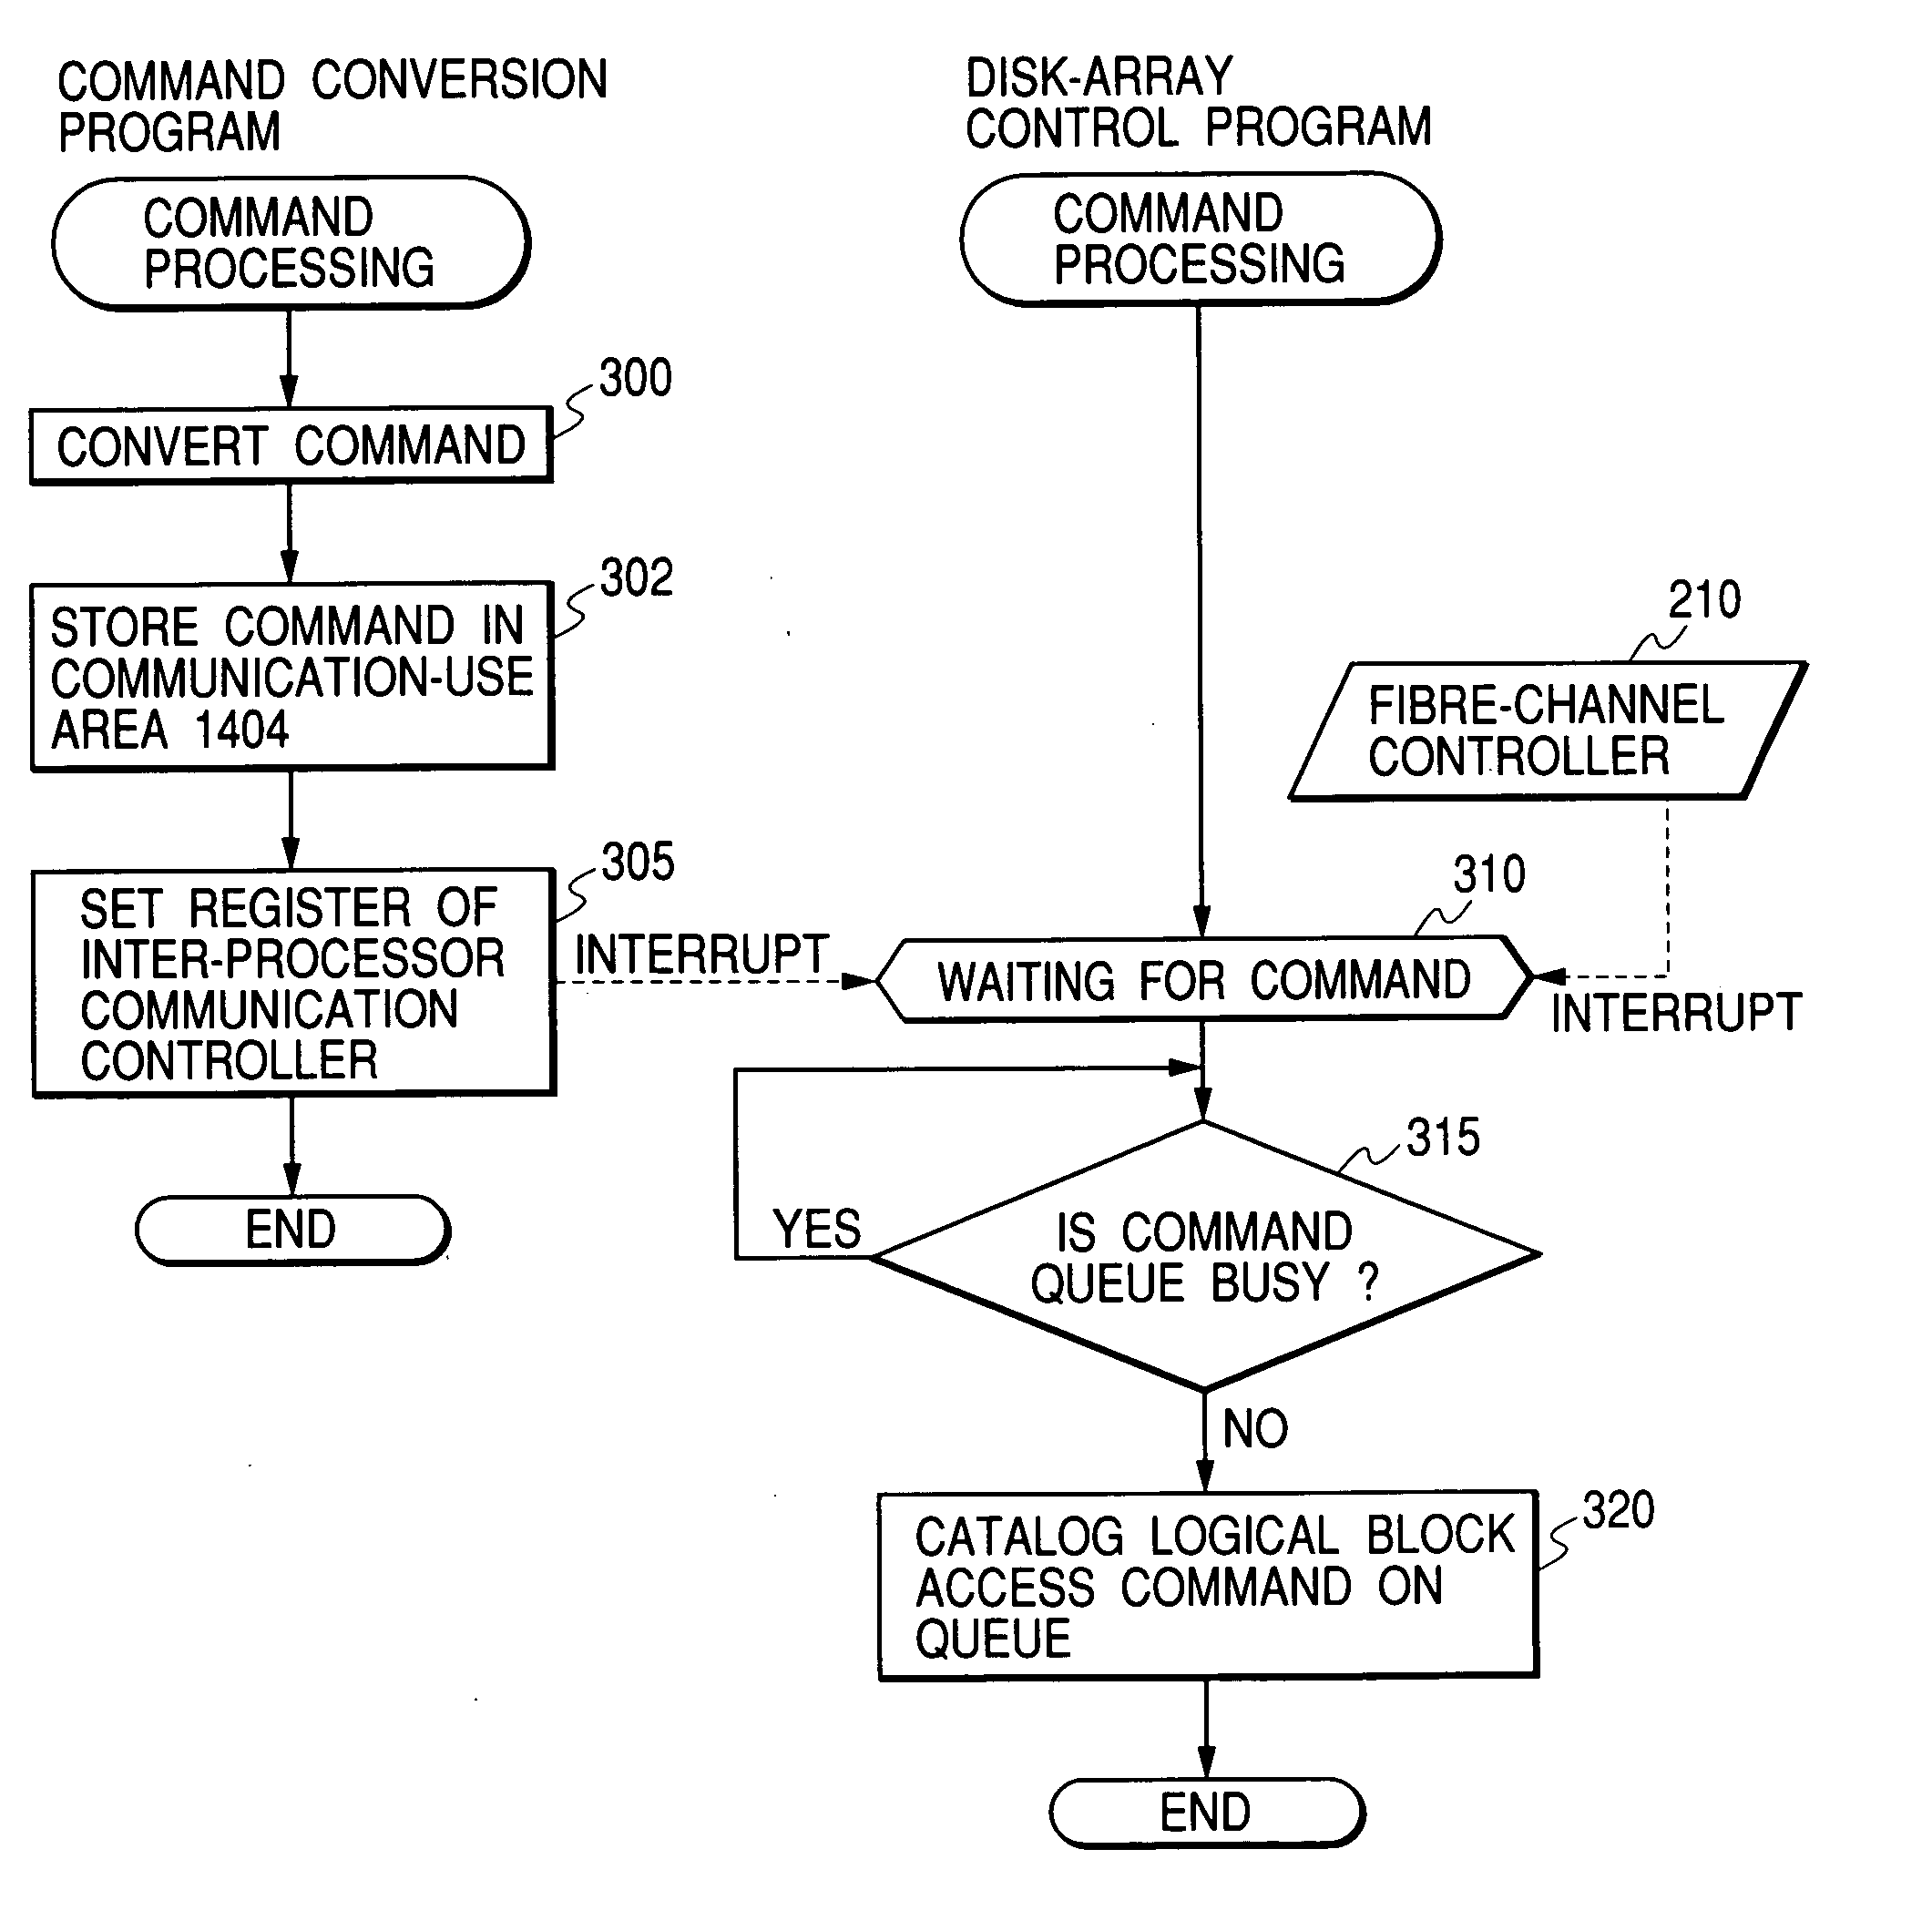 Storage system having a plurality of interfaces